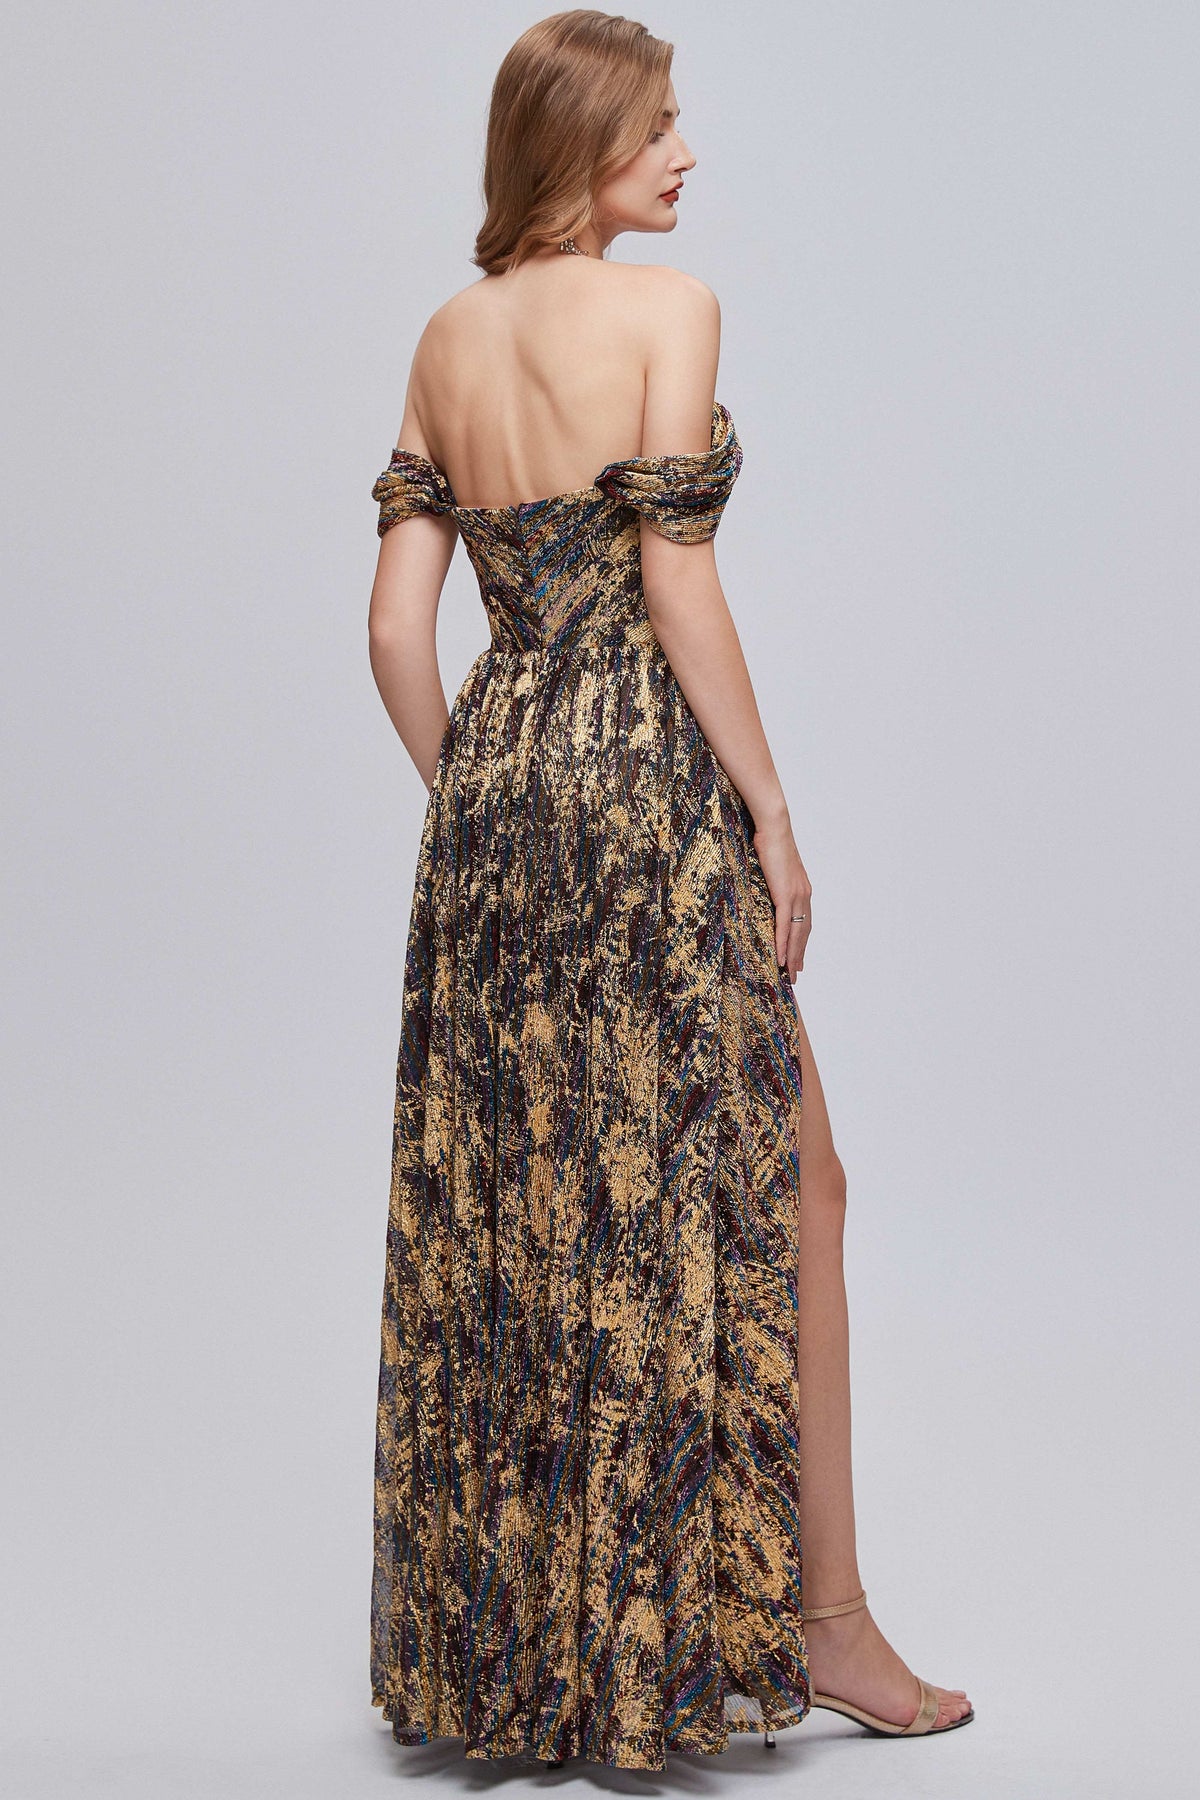 Black and Brown Floral Print Off-the-Shoulder A-Line Long Prom Dress